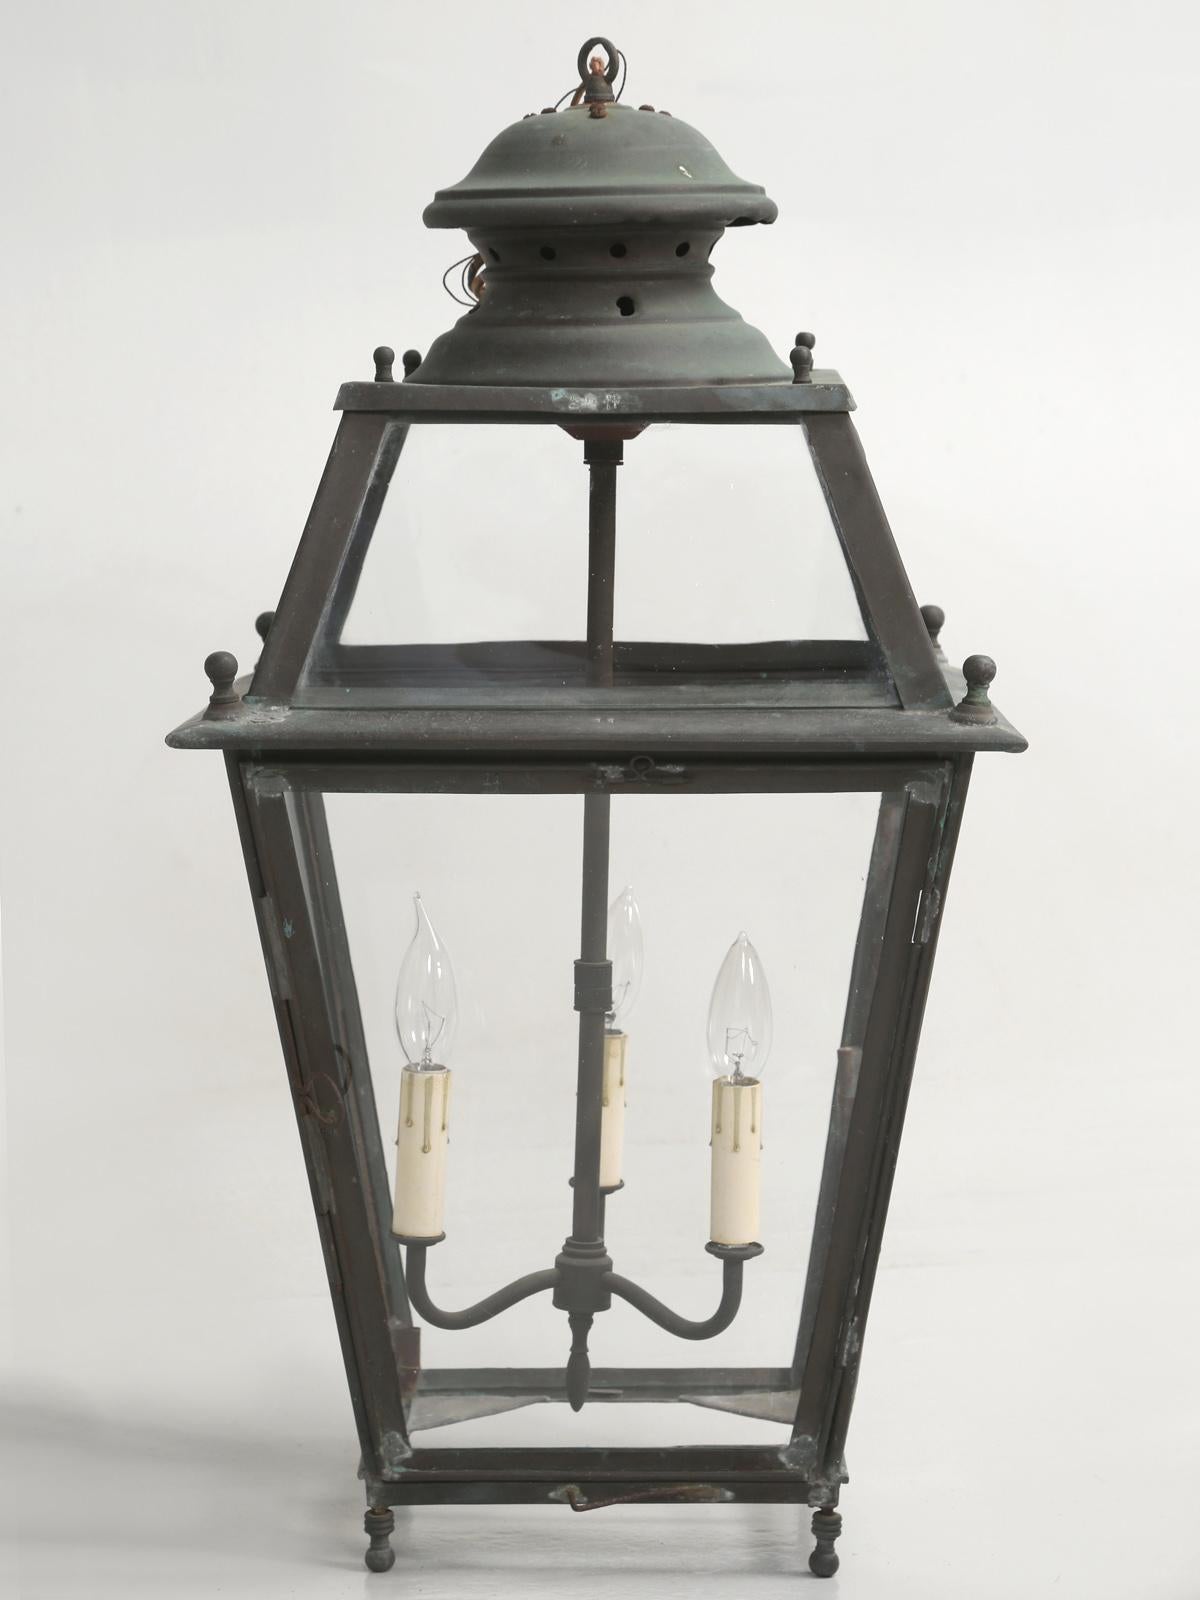 Antique French copper lantern, that we imported and restored correctly; even fitting it with handmade French wavy glass. Rewired for the states and with a beautiful natural patina.